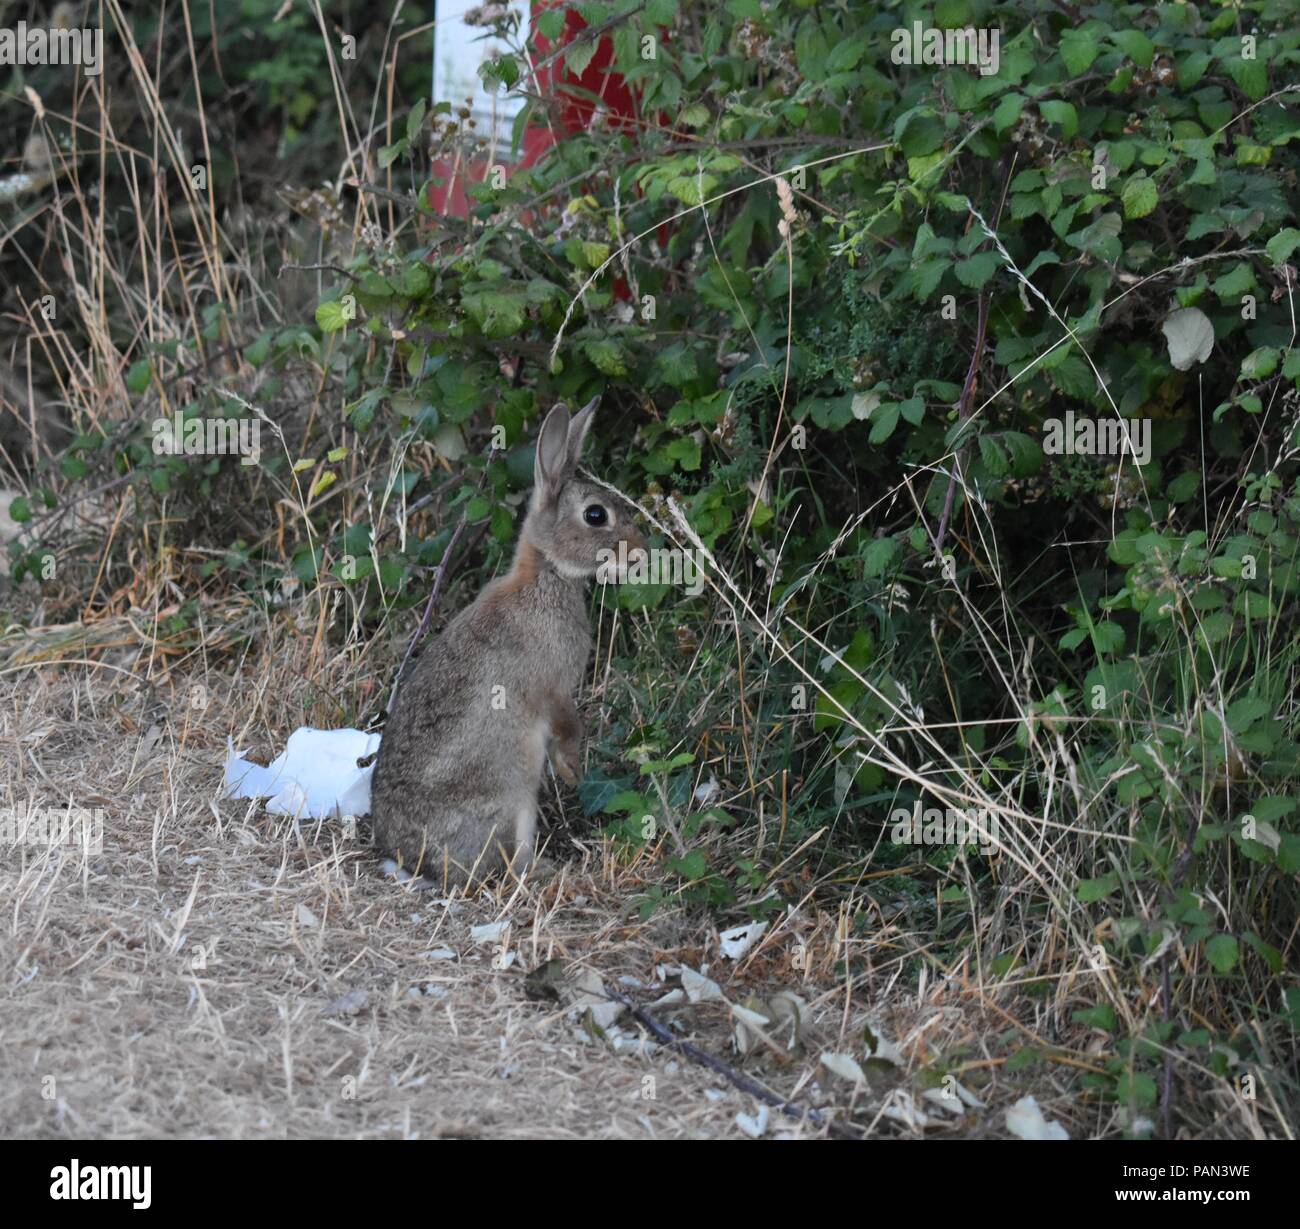 Wild Rabbit Living With Litter Pollution on Hilltop Near Portsmouth, Hampshire, UK Stock Photo